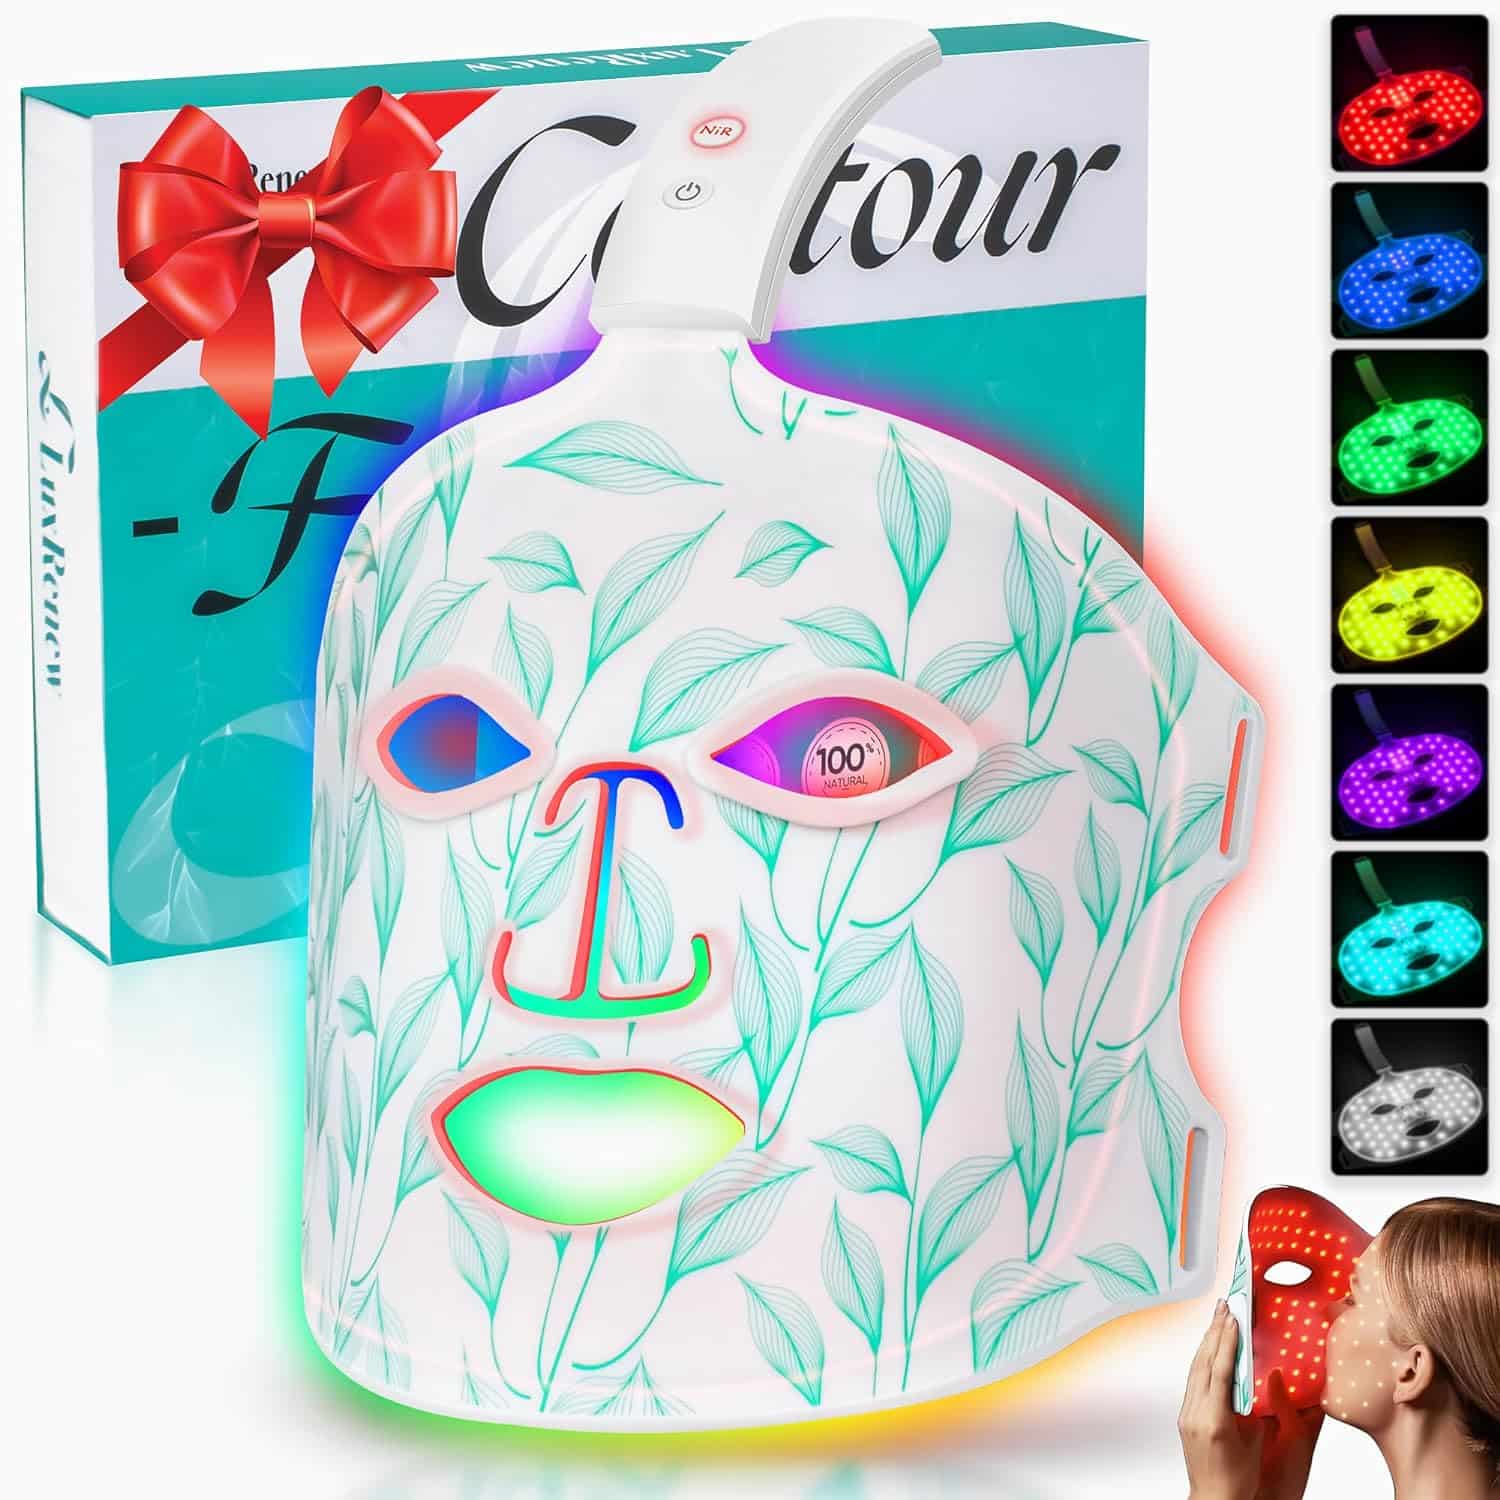 Red Light Therapy Mask, Led Contour Face Mask Light Therapy, 7+1 Color Near-infrared 850 Red Light Face Mask Portable and Rechargeable, Red Light Therapy At Home and Wireless Led Face Mask